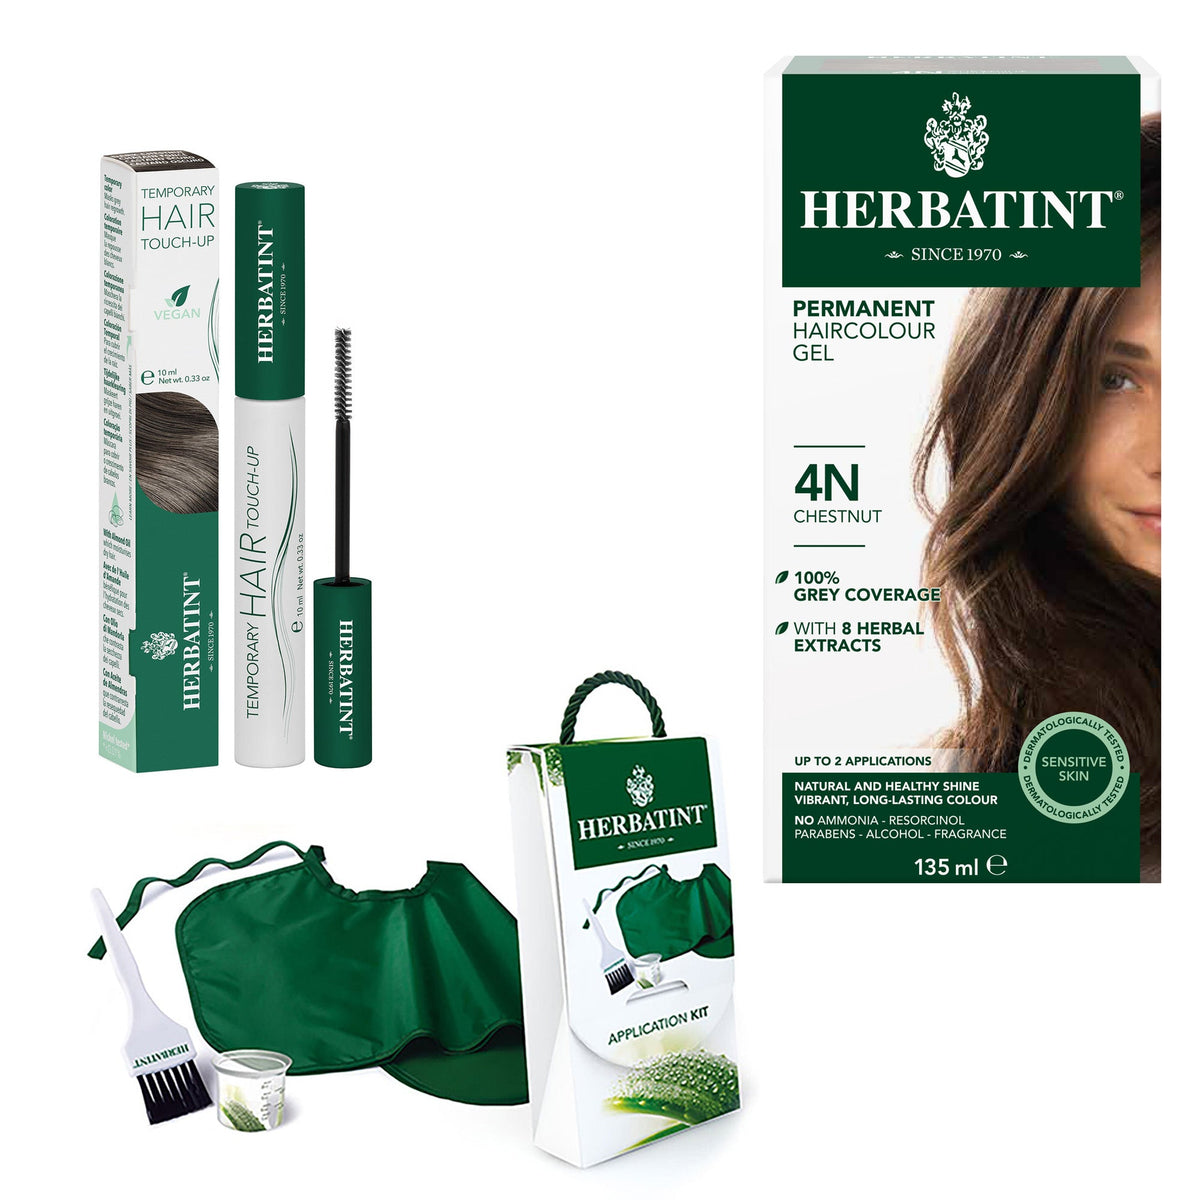 Chestnut Permanent Haircolour Gel, Root Touch-up and application Kit Value Bundle - A.Vogel Canada